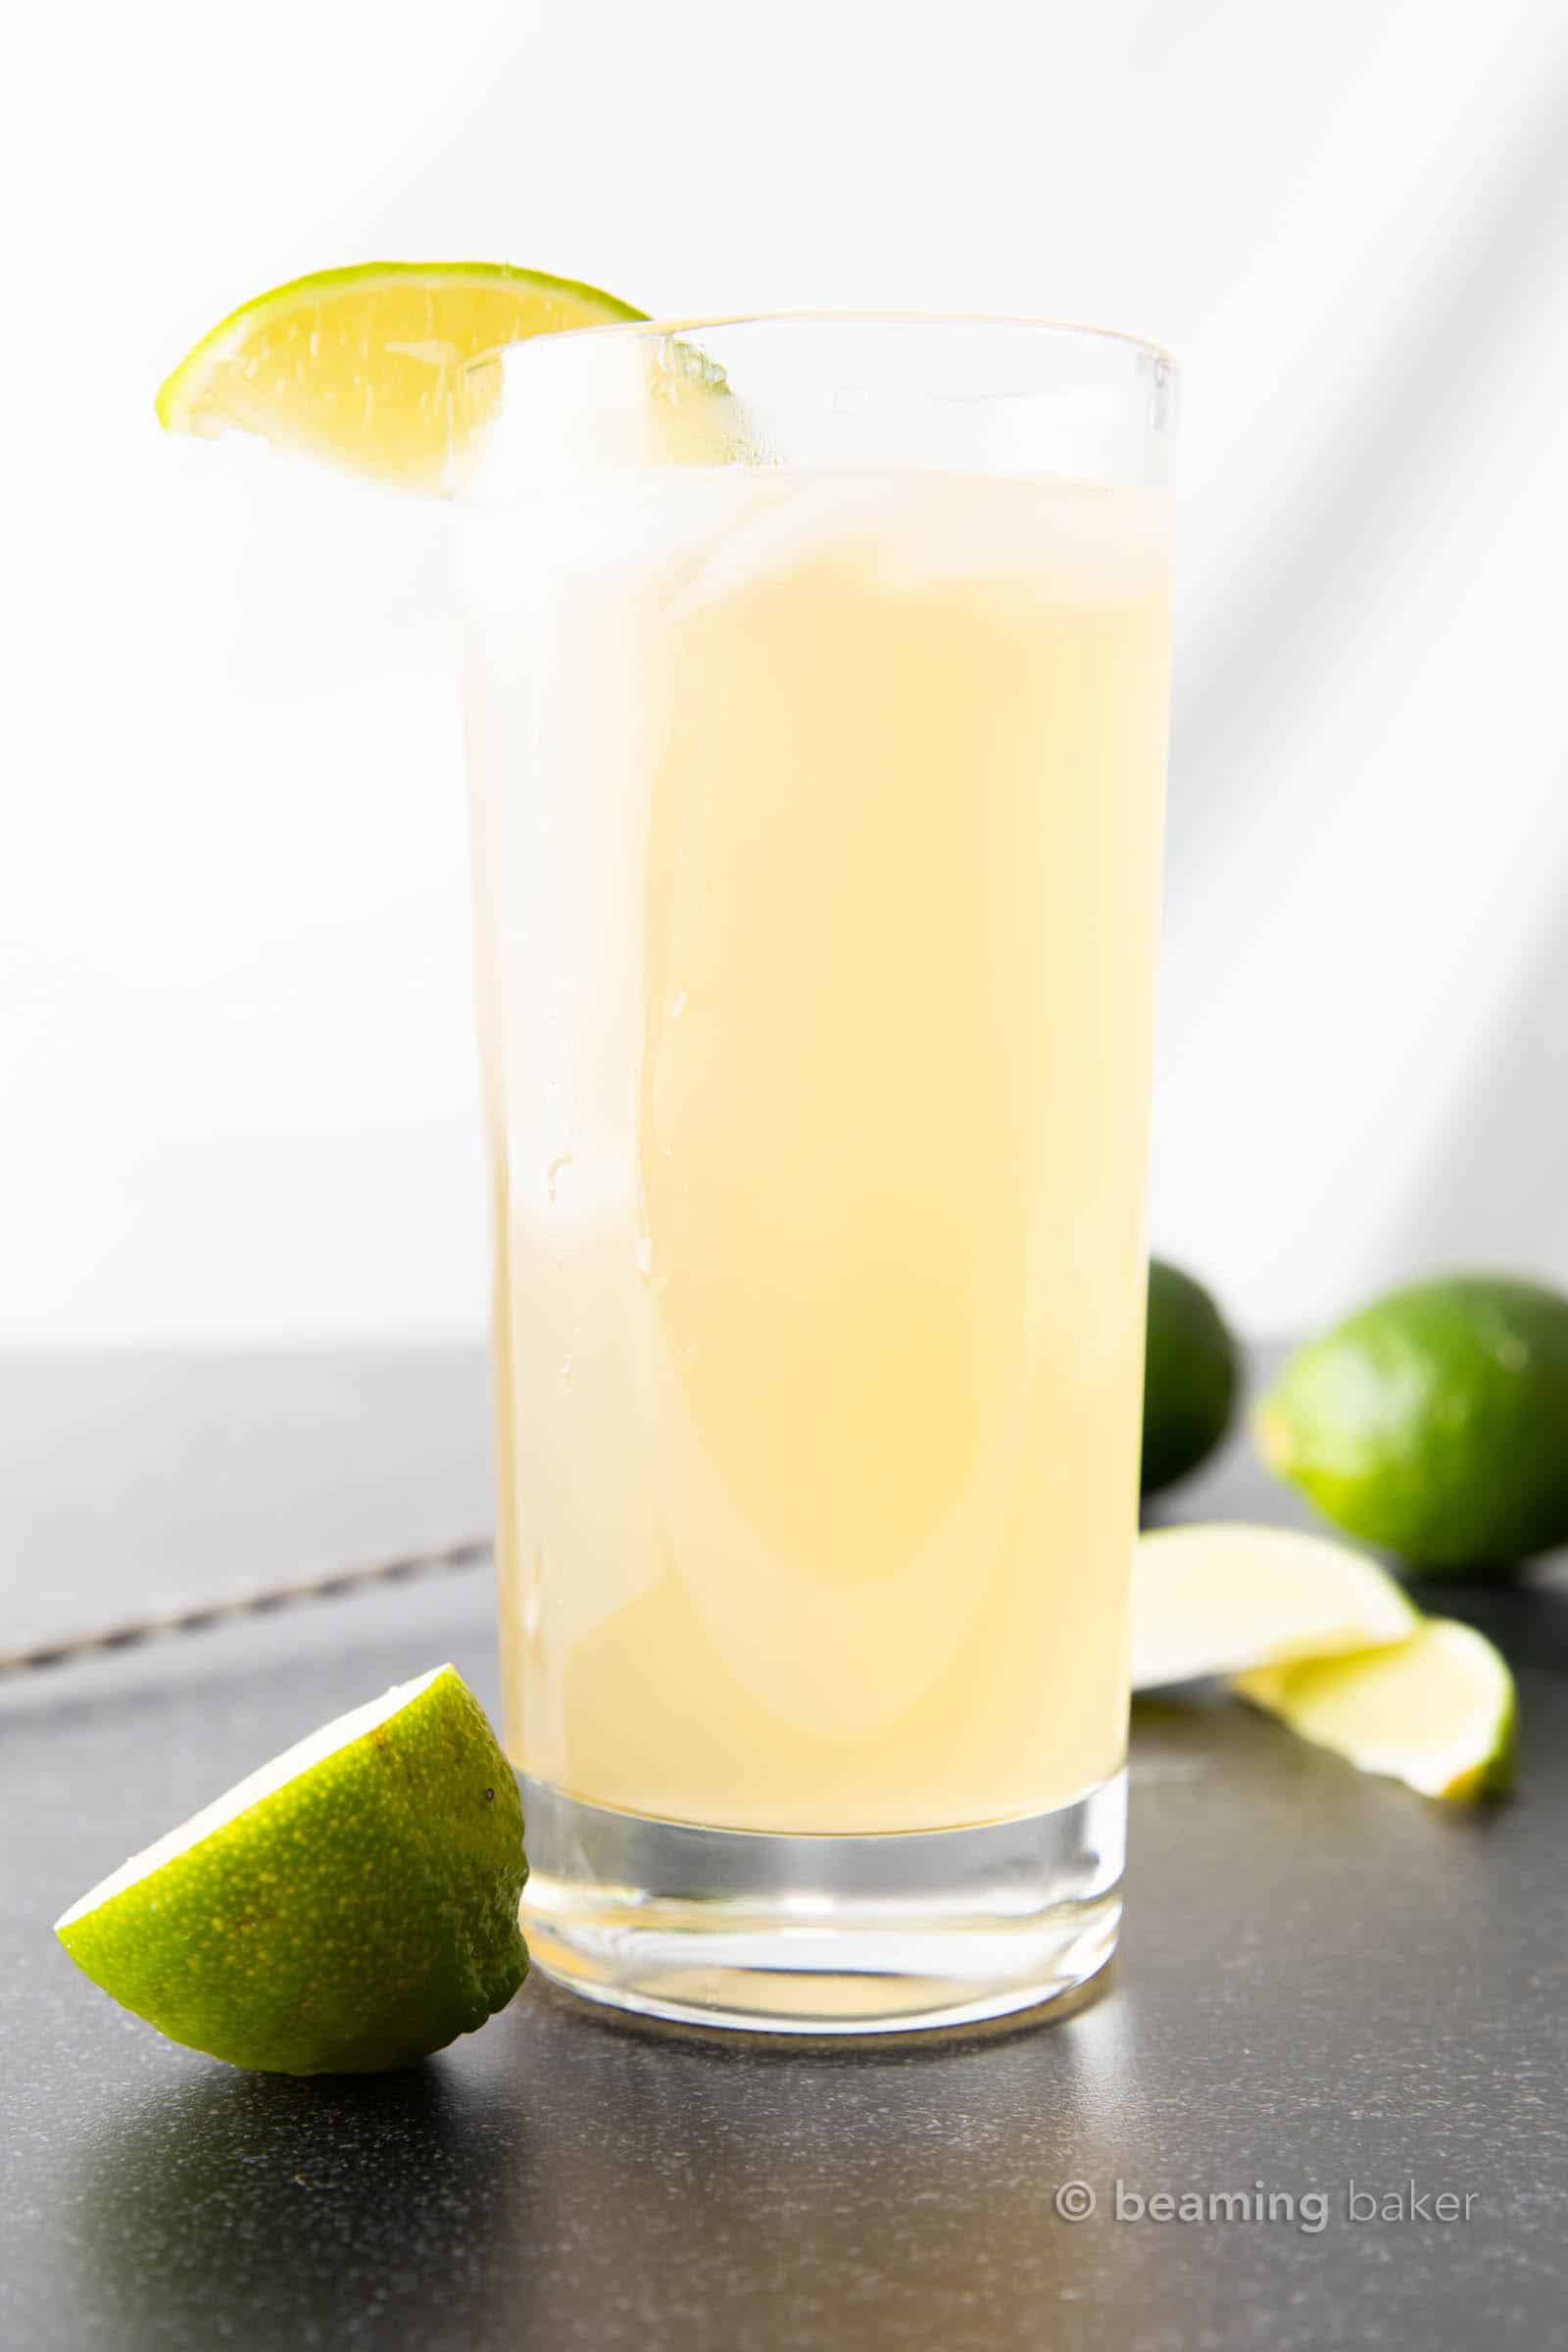 Highball glass filled with Tennessee mule cocktail, garnished with lime wedge